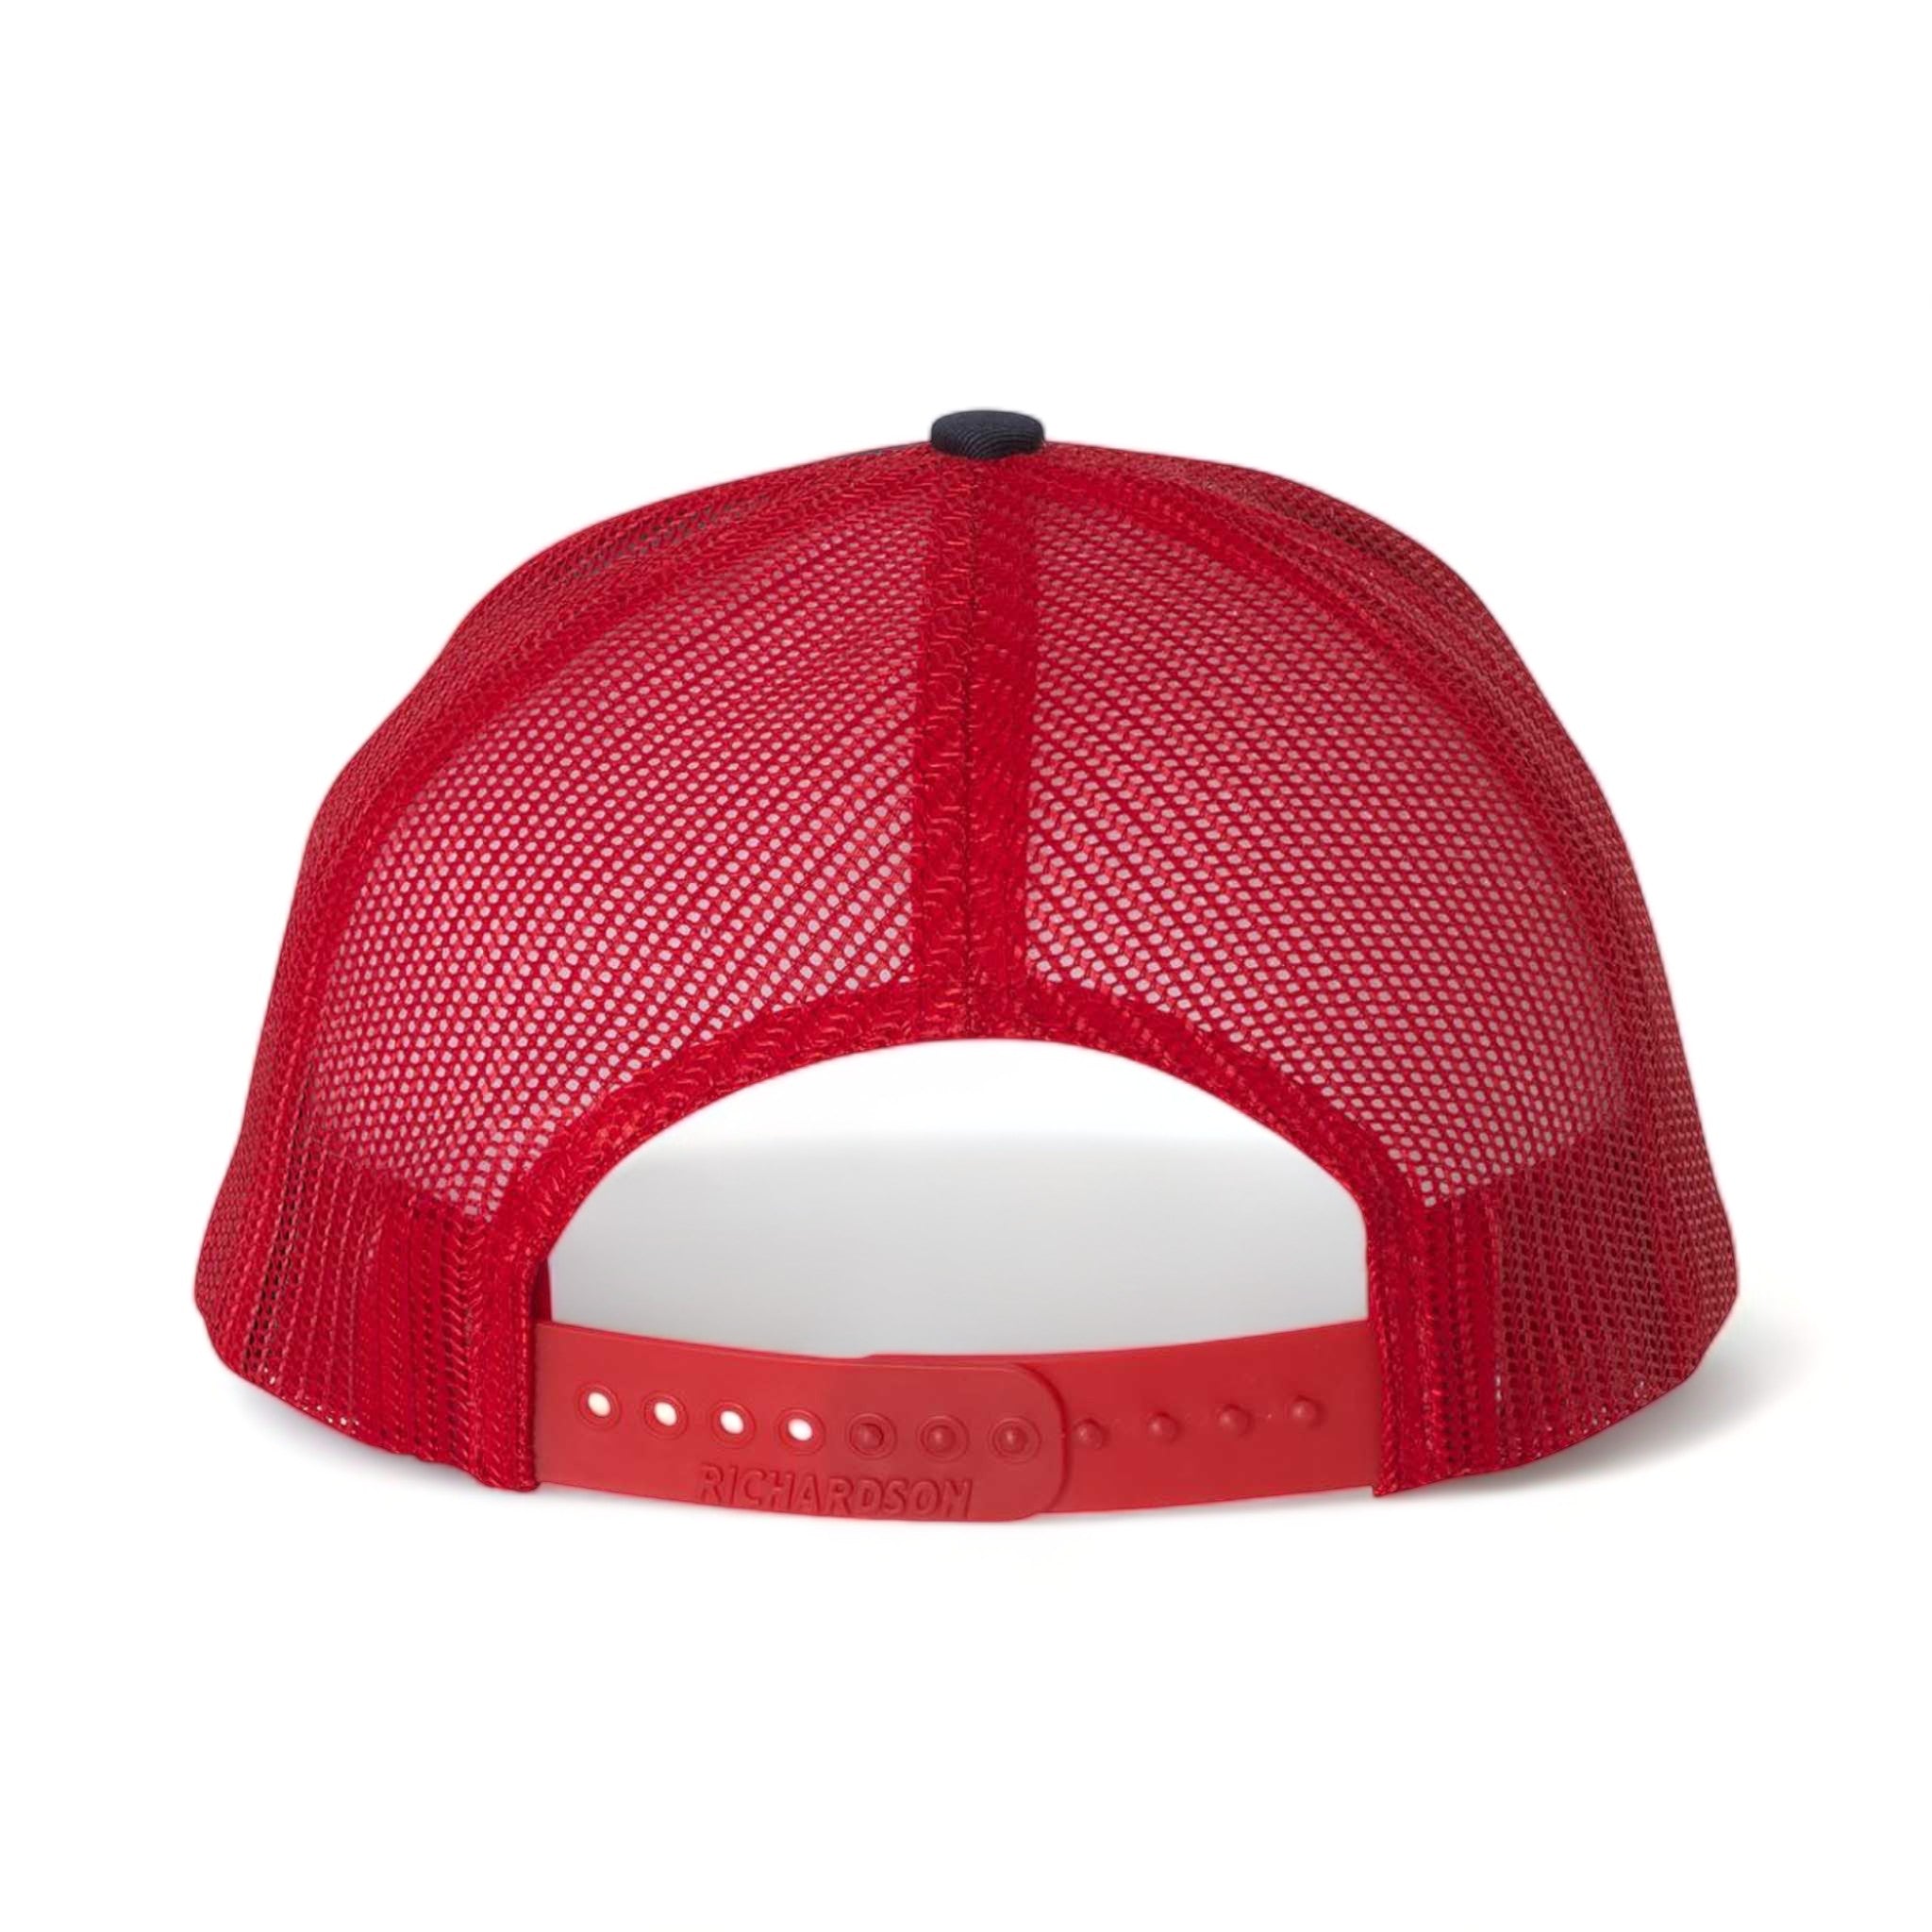 Back view of Richardson 112 custom hat in navy and red